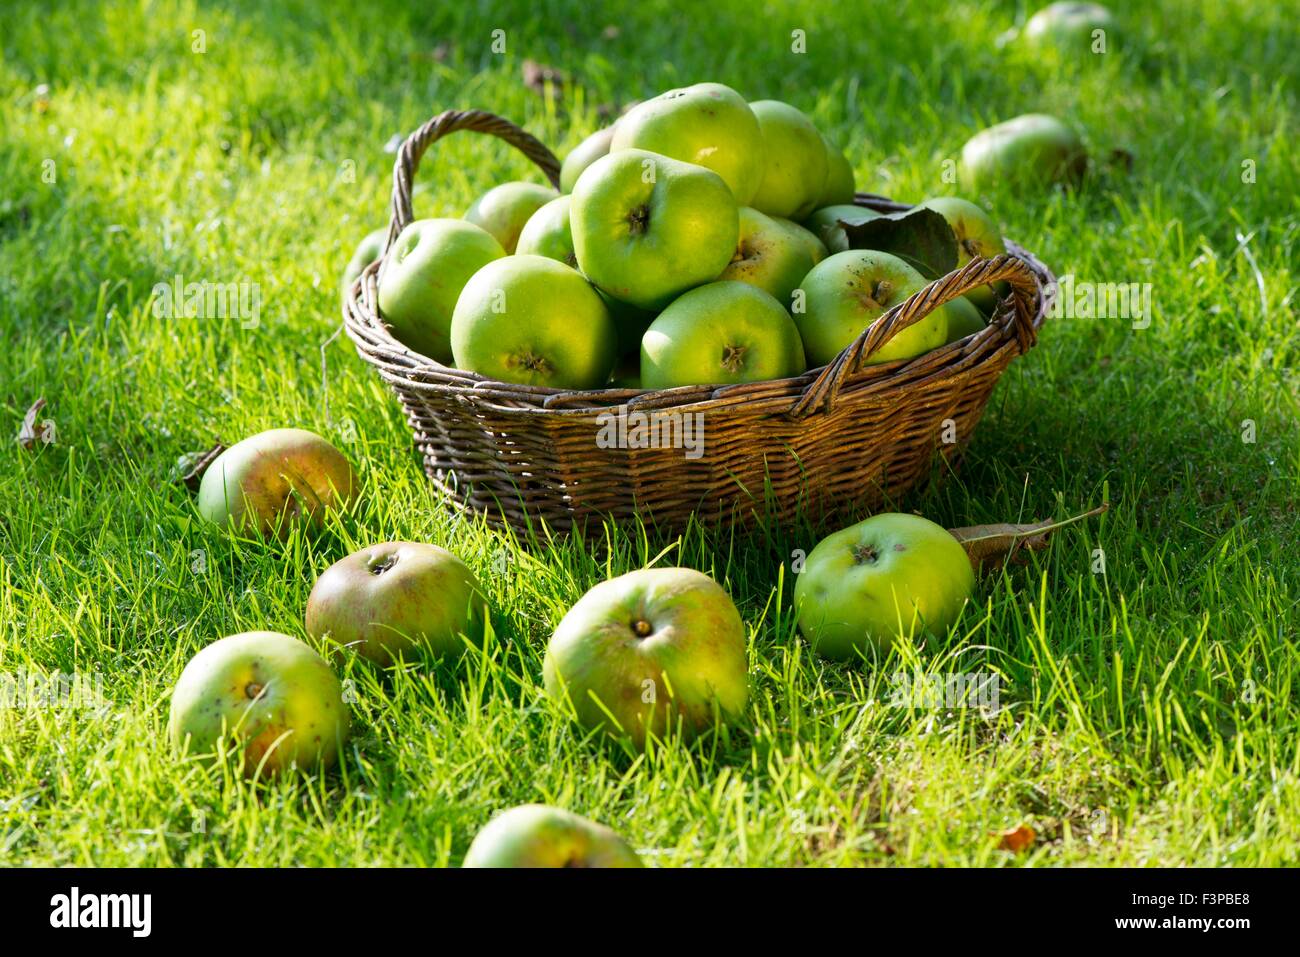 Windfall Bramley apples in basket on lawn. Stock Photo